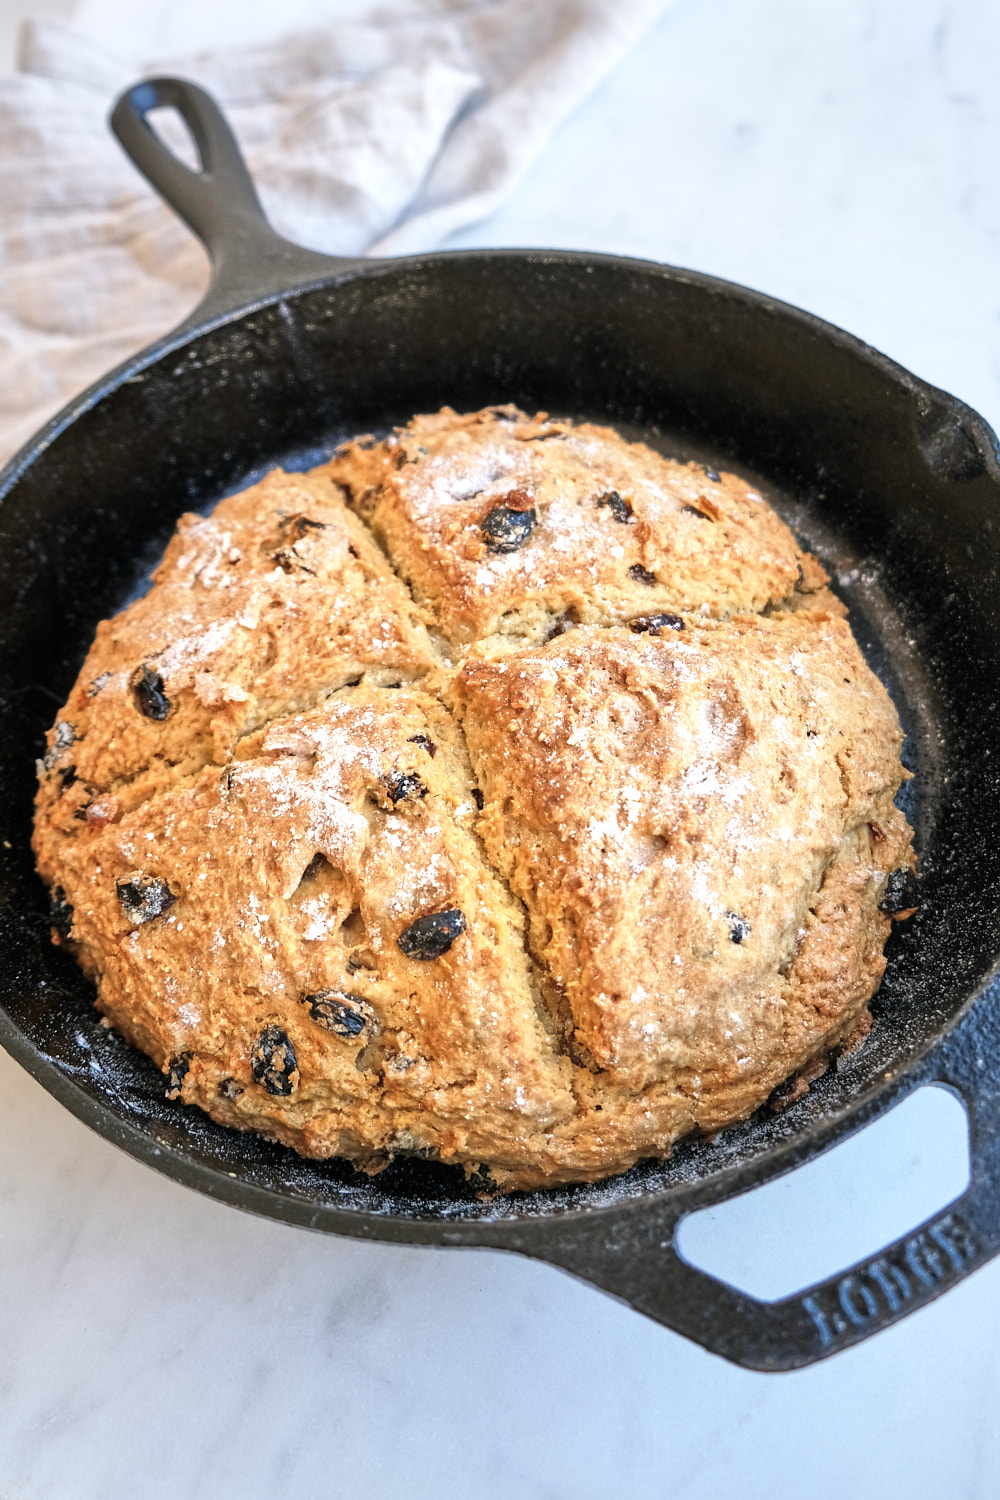 A loaf of irish soda bread in an iron skillet